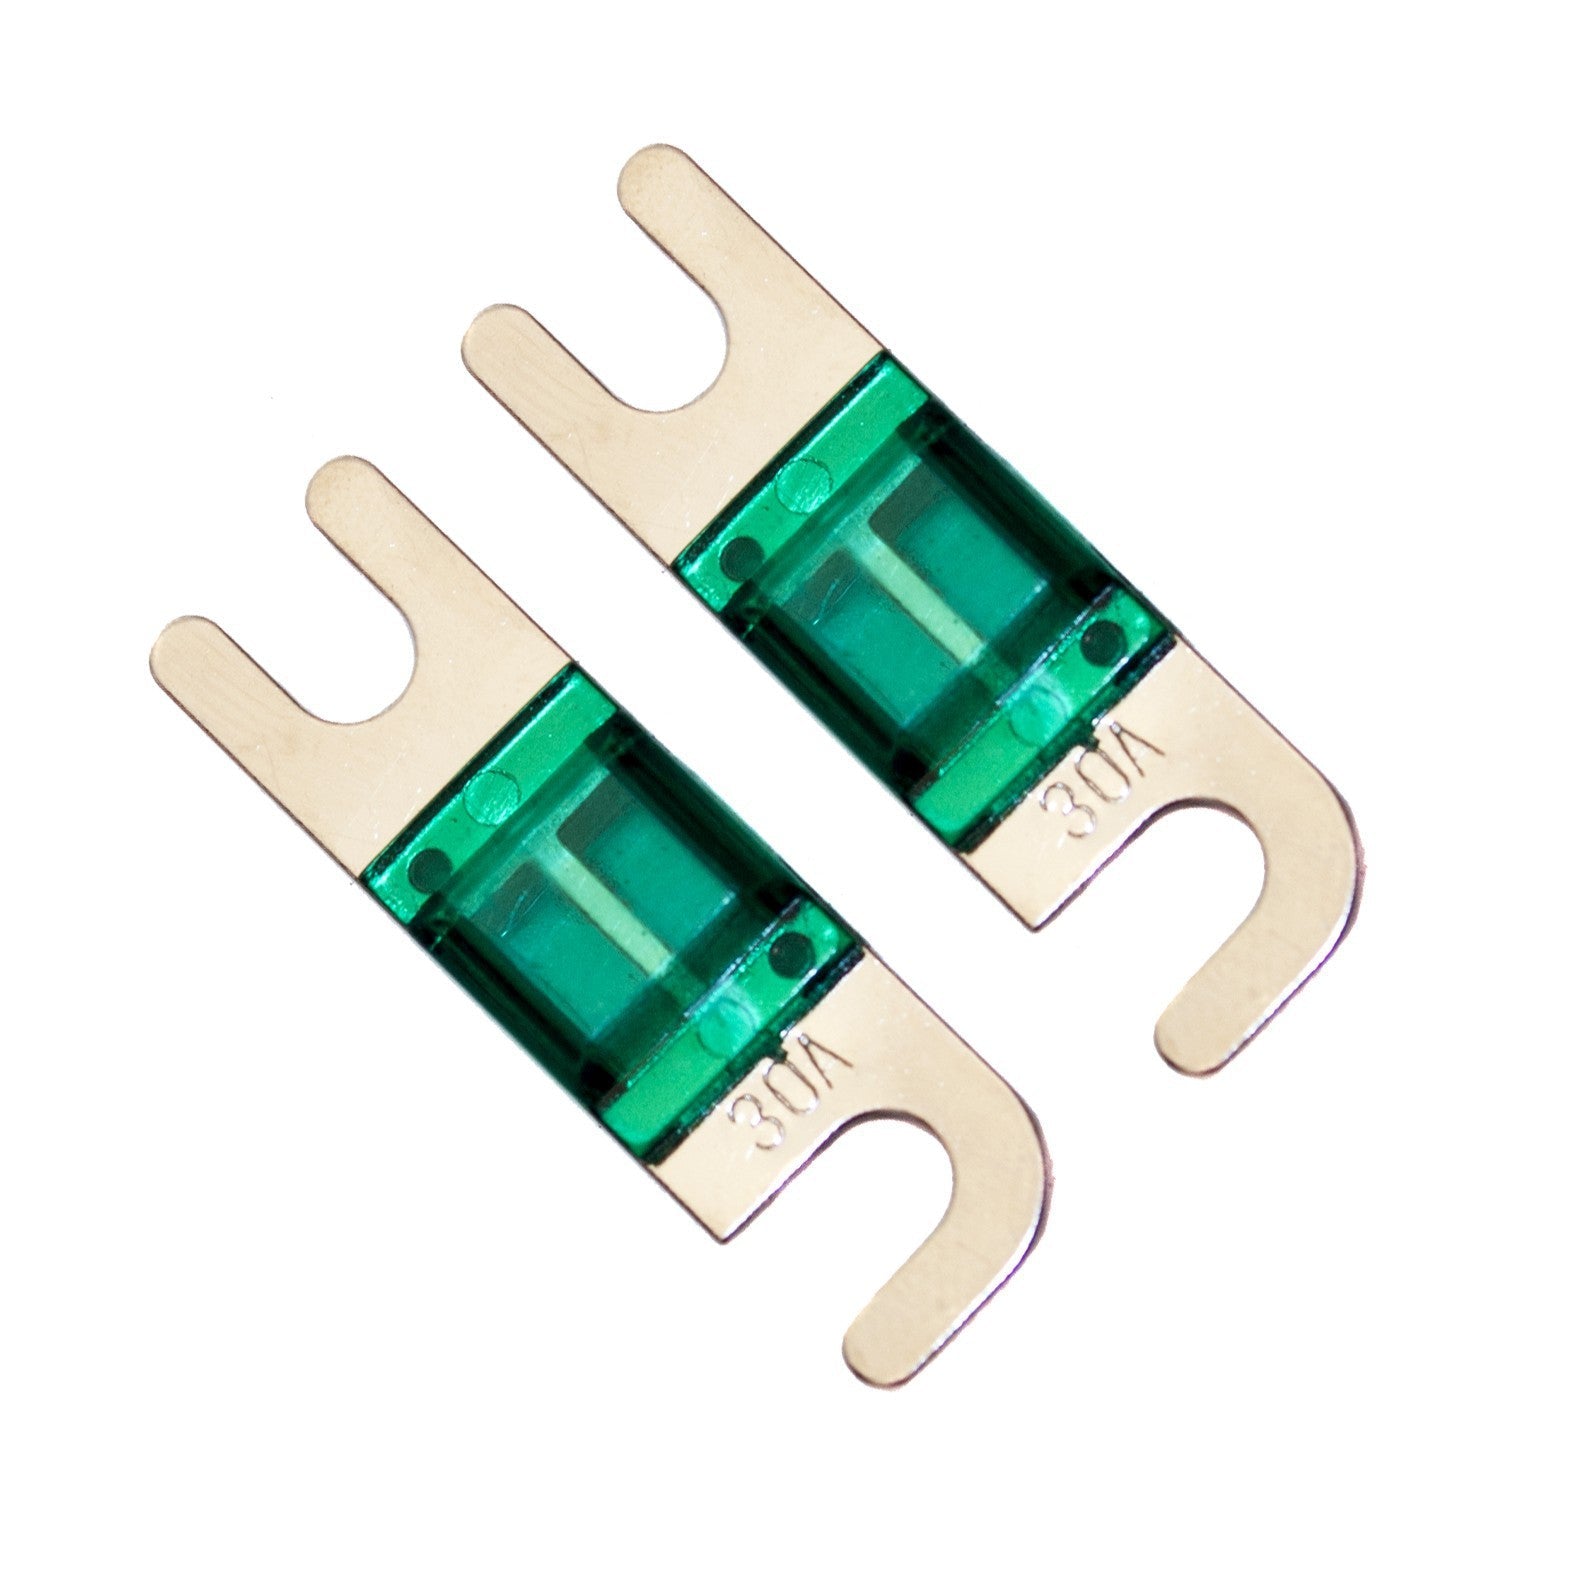 FOUR Connect Rhodium-coated MiniANL fuse 30A-200A, 1pc